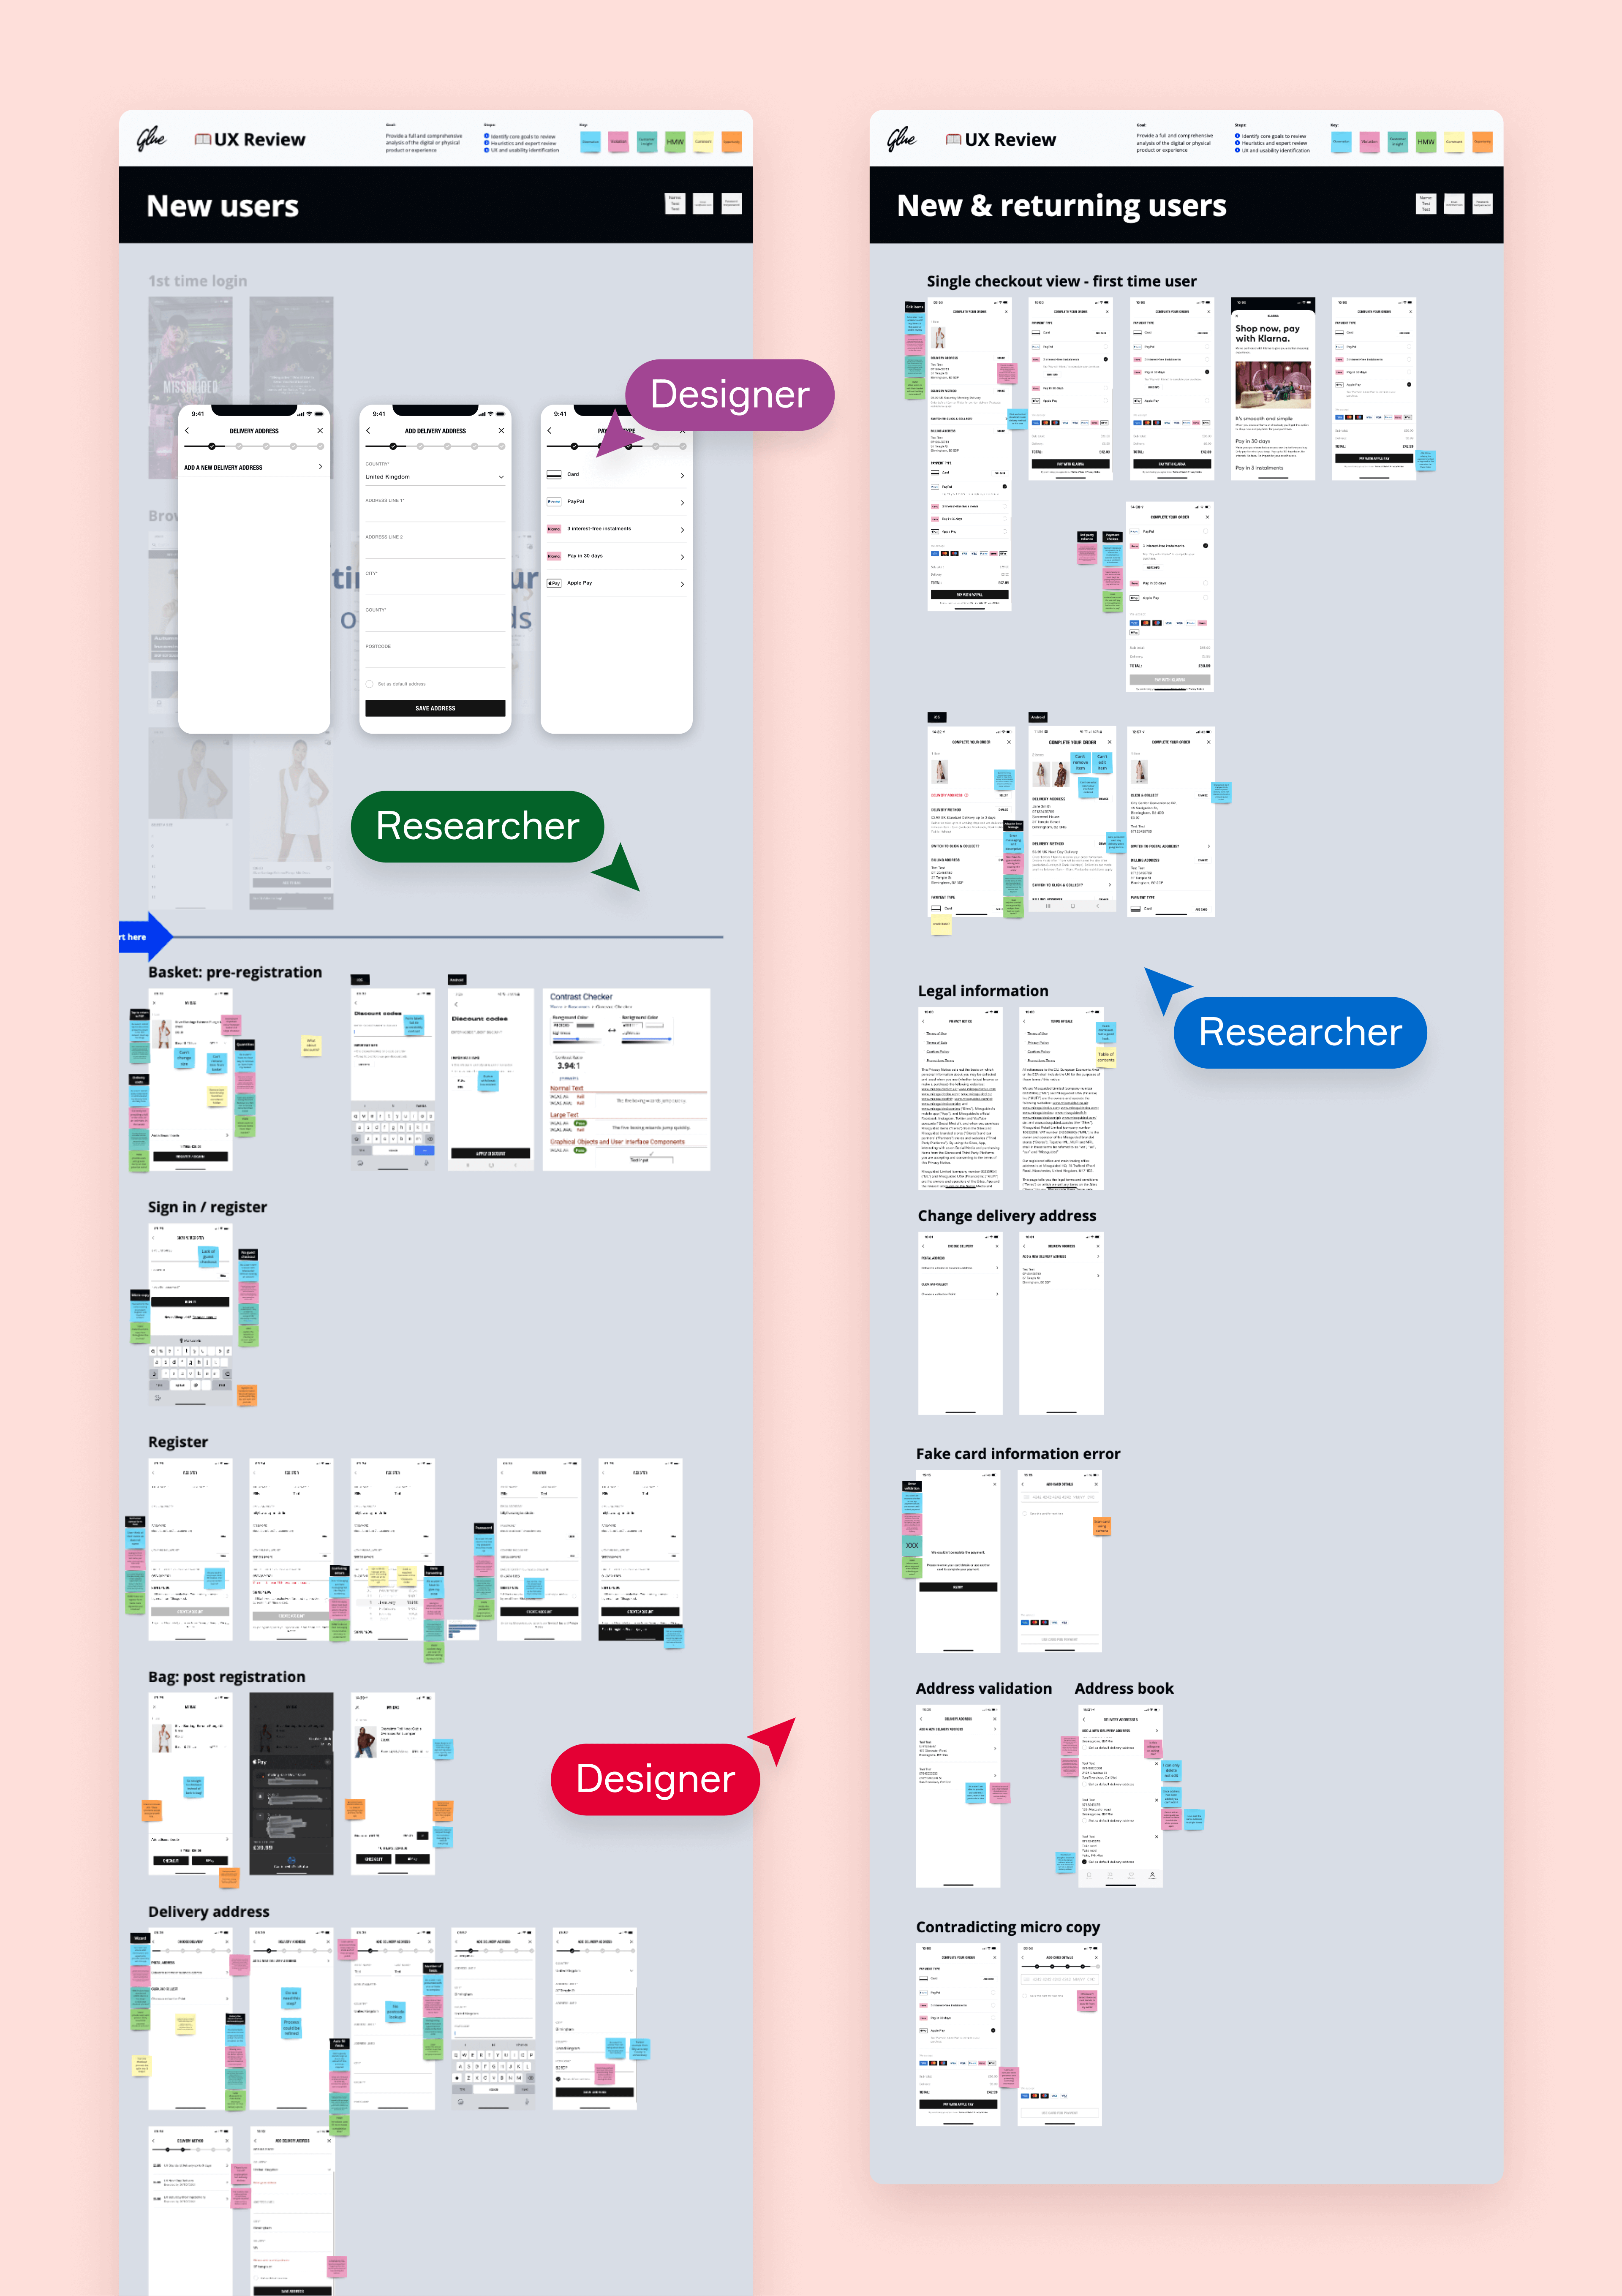 Experience Review boards for Missguided's existing mobile app checkout design